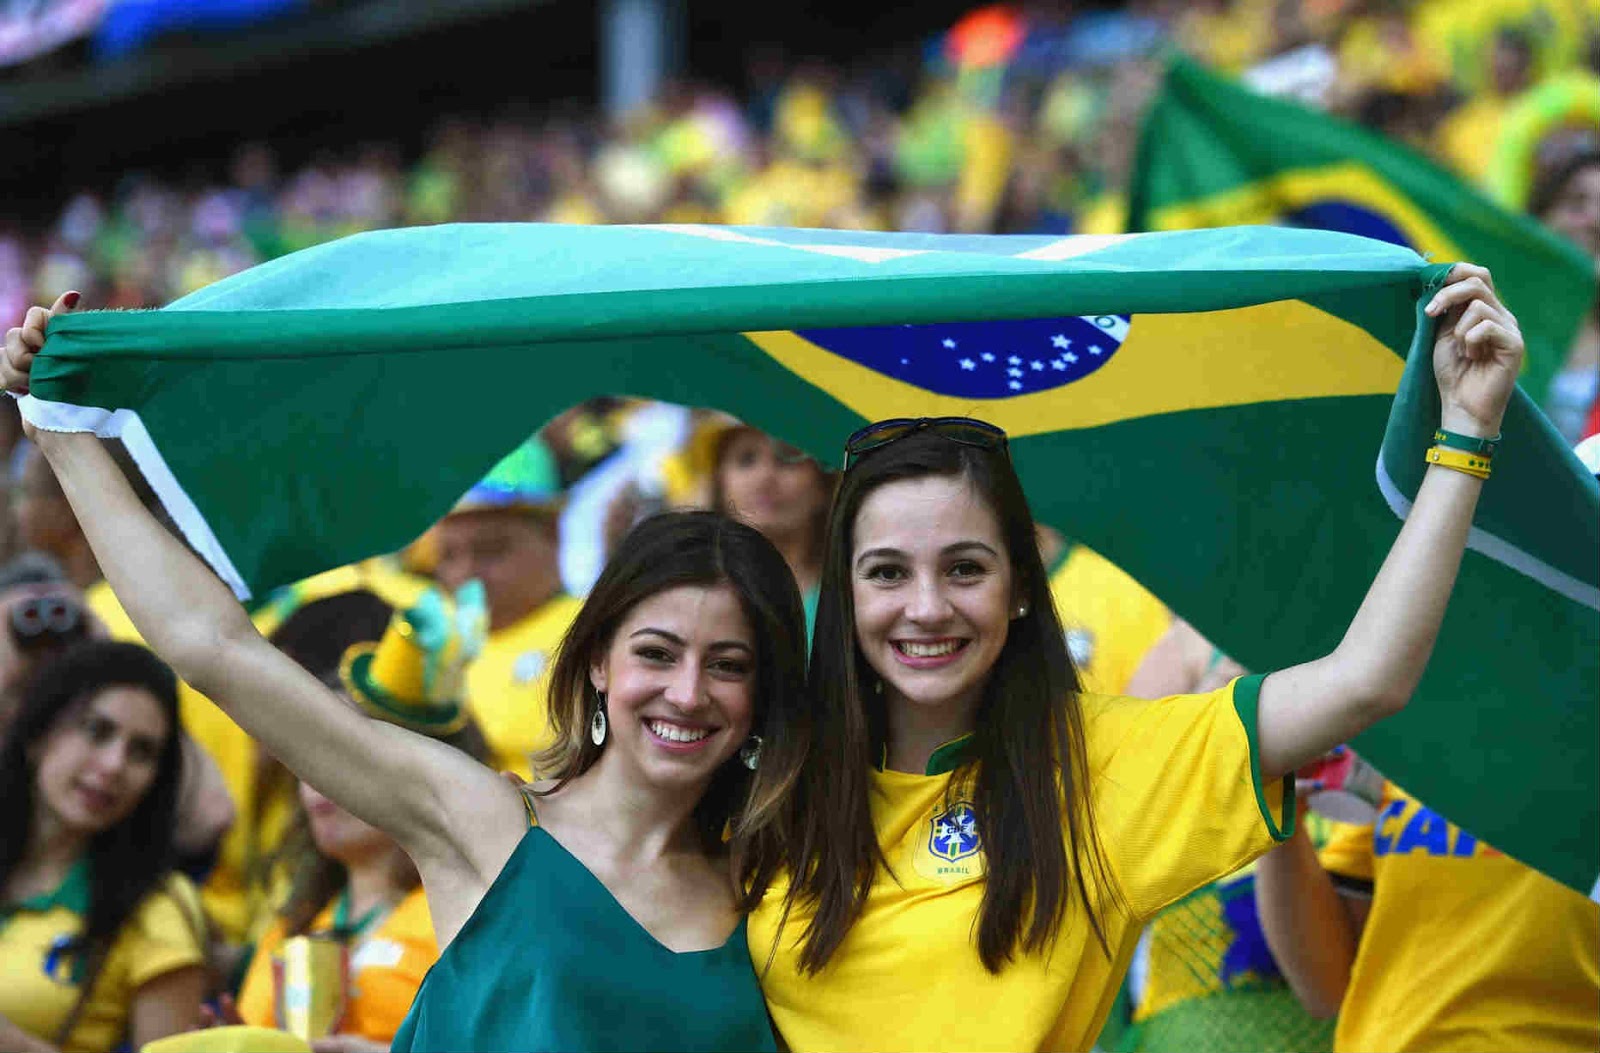 While Brazil may have the hottest female soccer fans, they just got elimina...